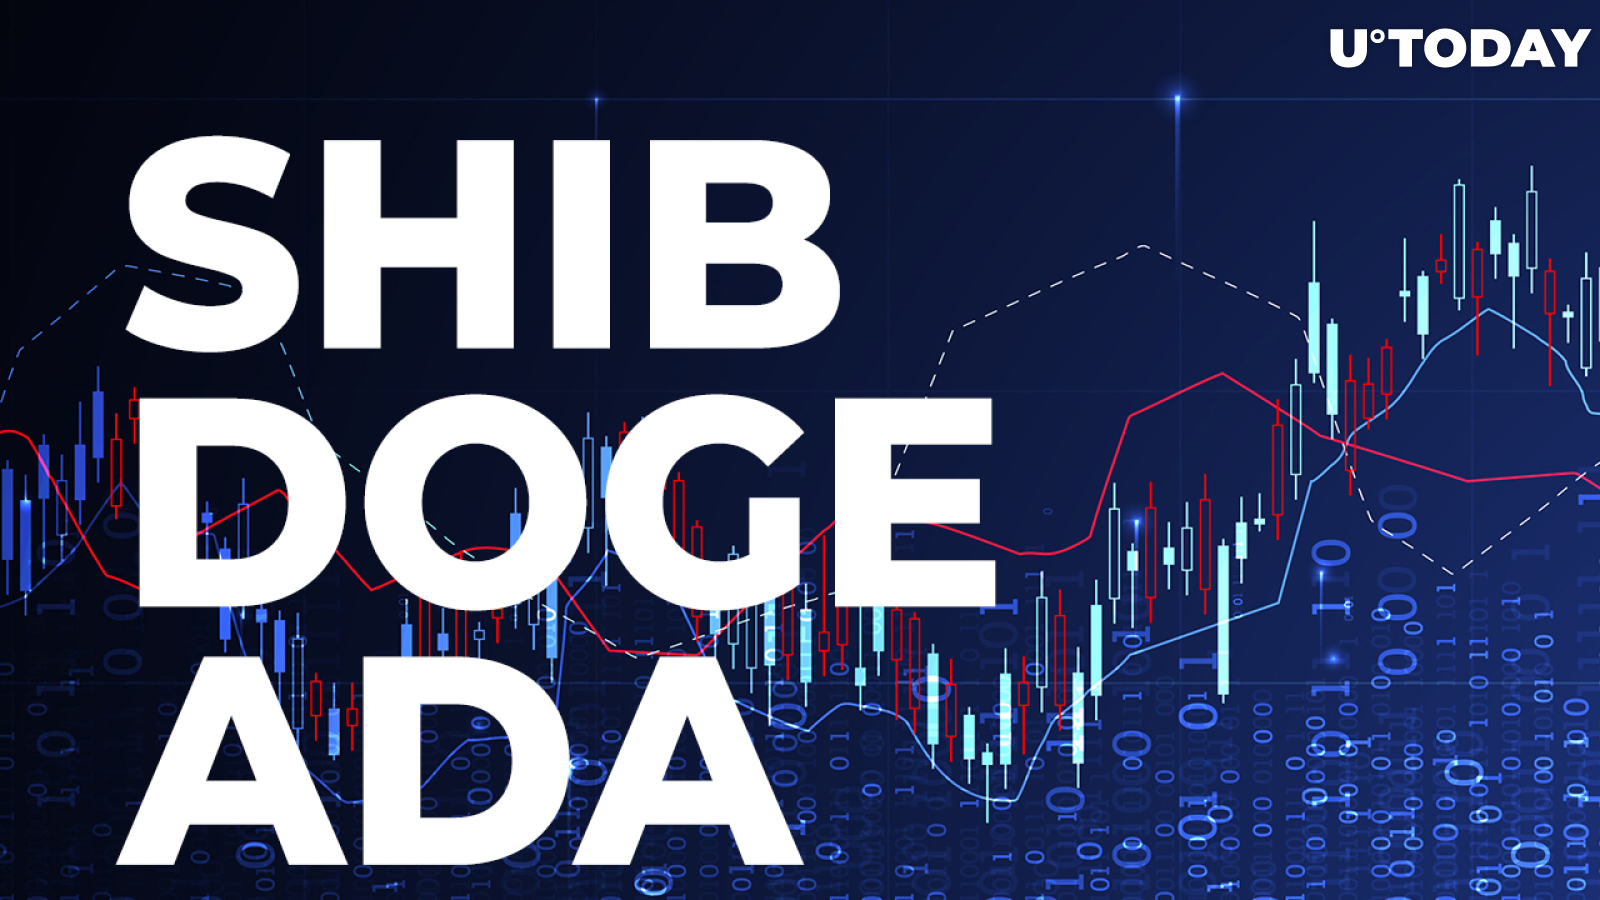 New SHIB, DOGE, ADA Pairs Launched by This Major Exchange: Details